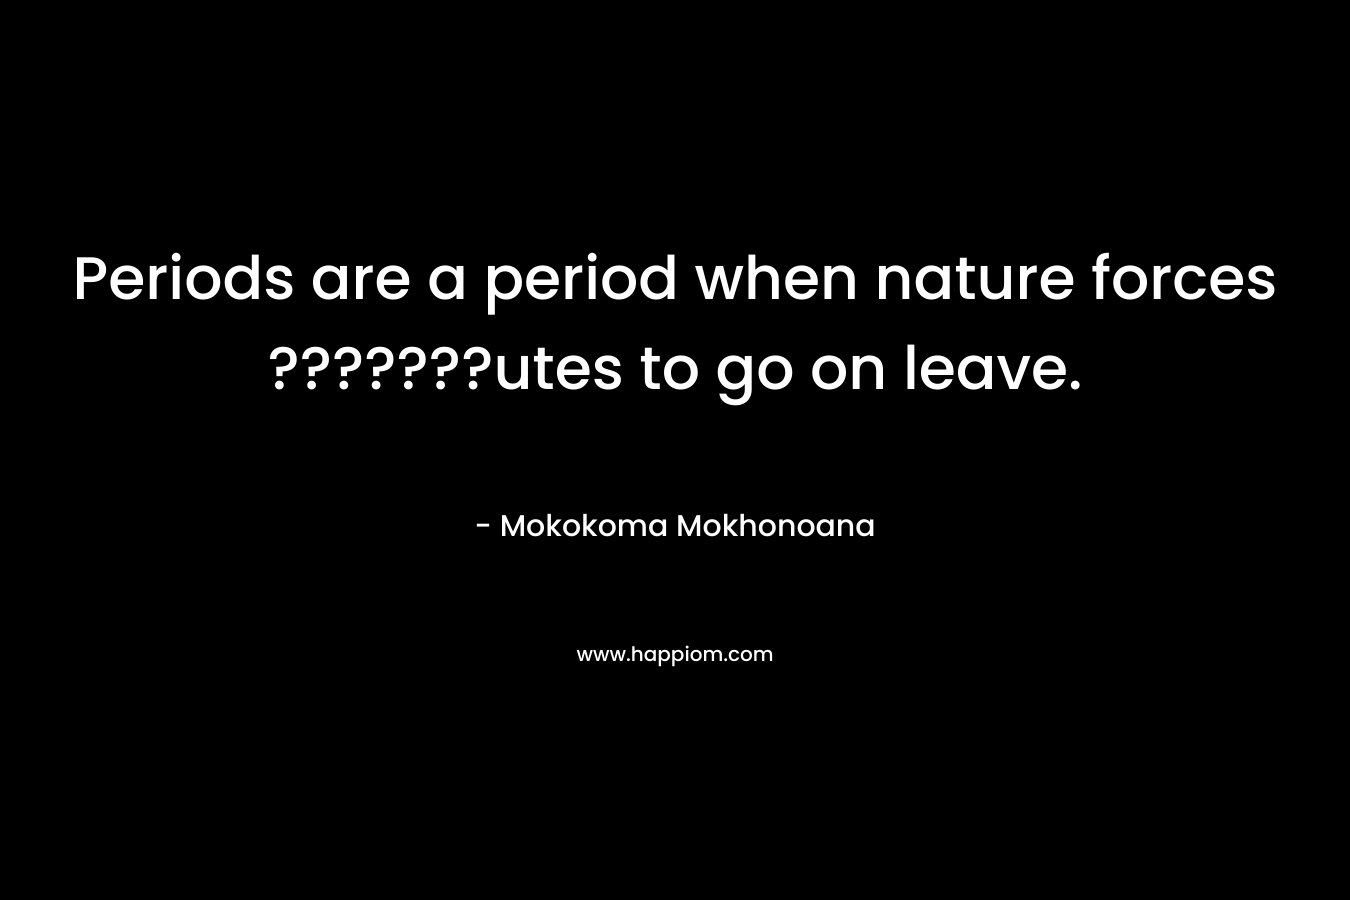 Periods are a period when nature forces ???????utes to go on leave.